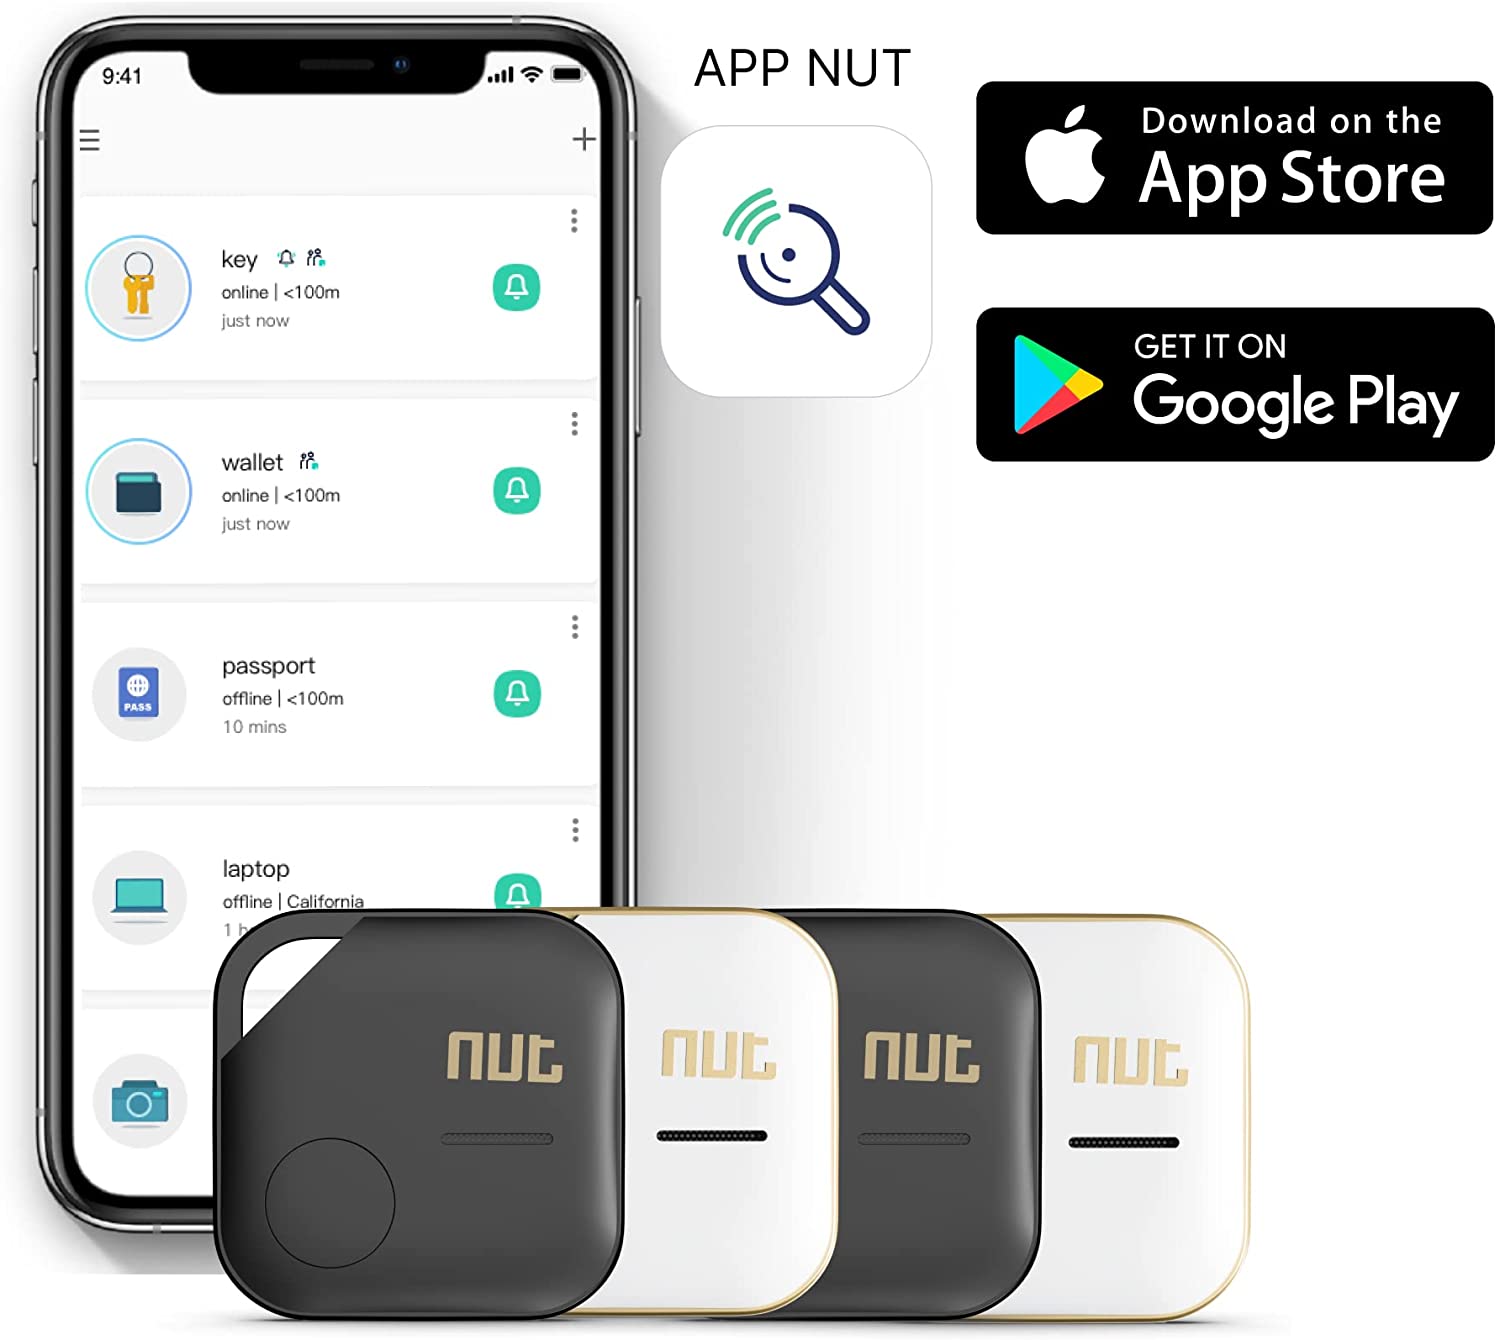 Go Nuts – Apps on Google Play